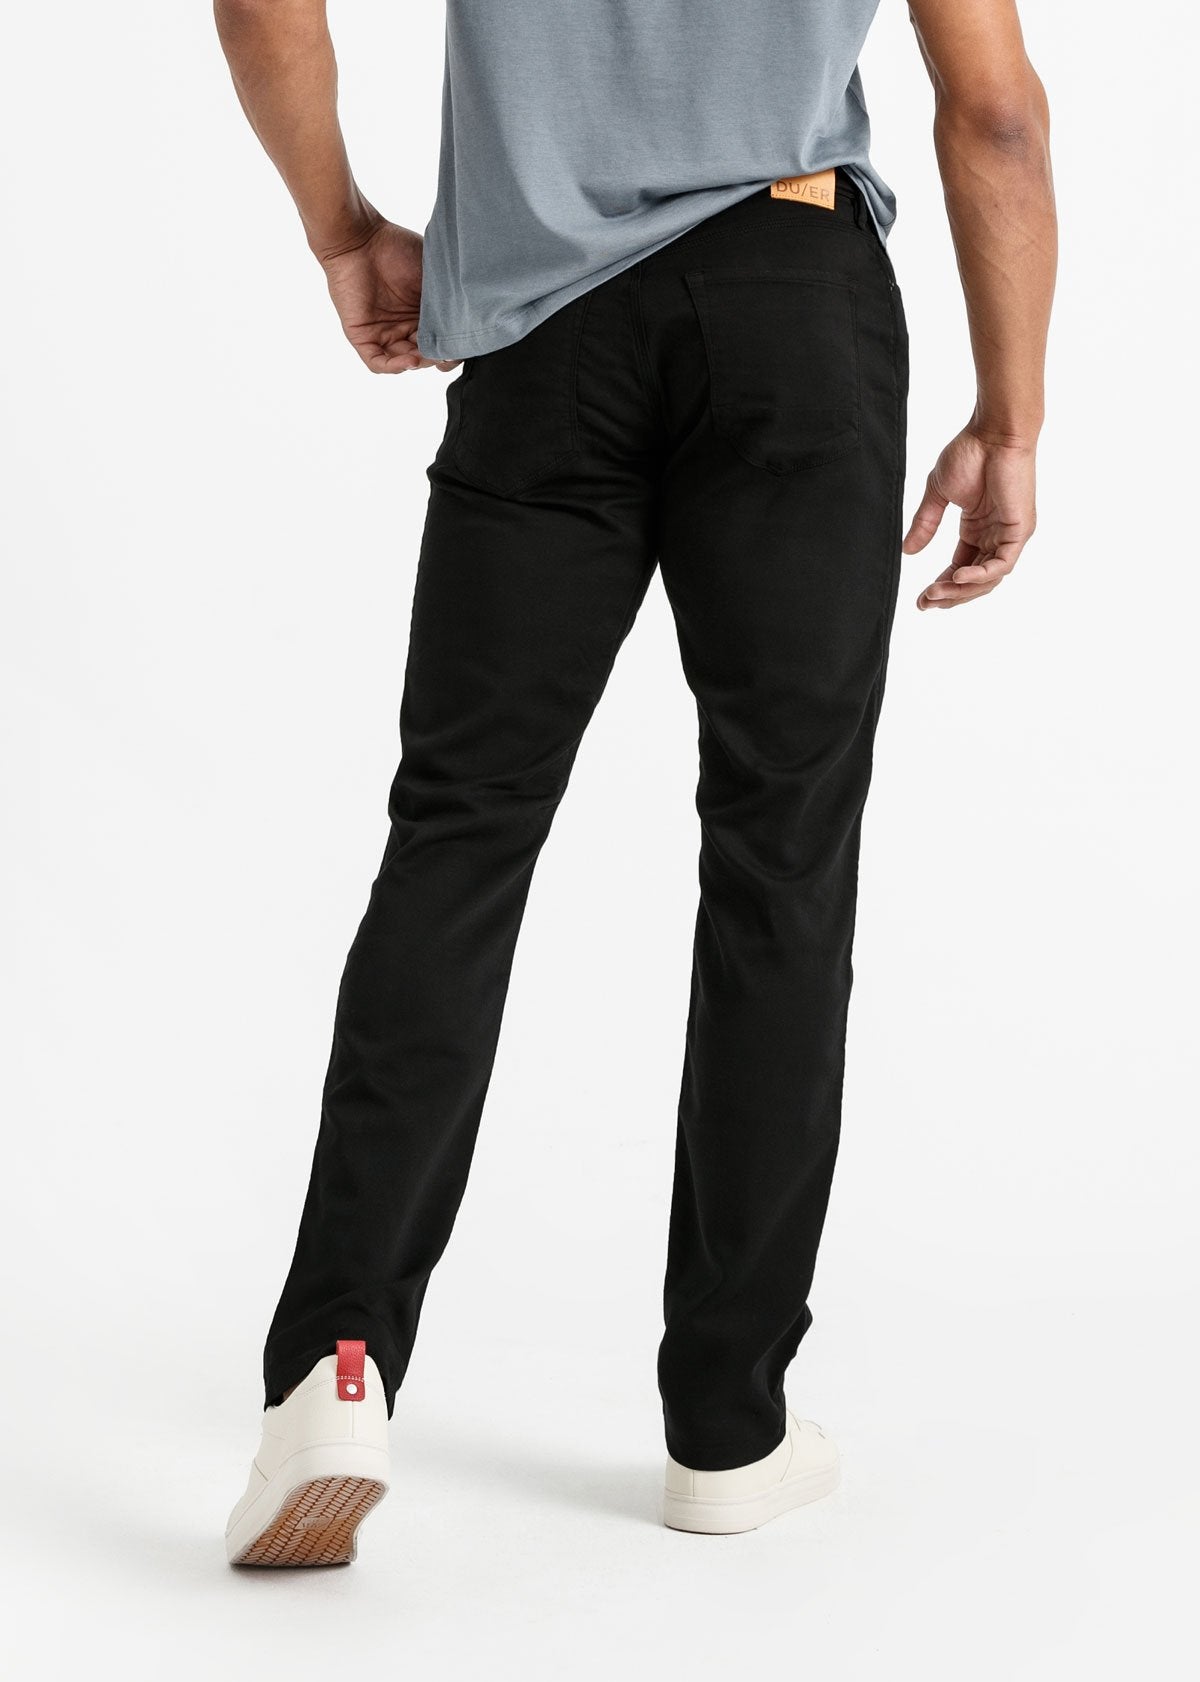 DuerNo Sweat Pants Relaxed Tapered Fit, 32 Inseam - Mens